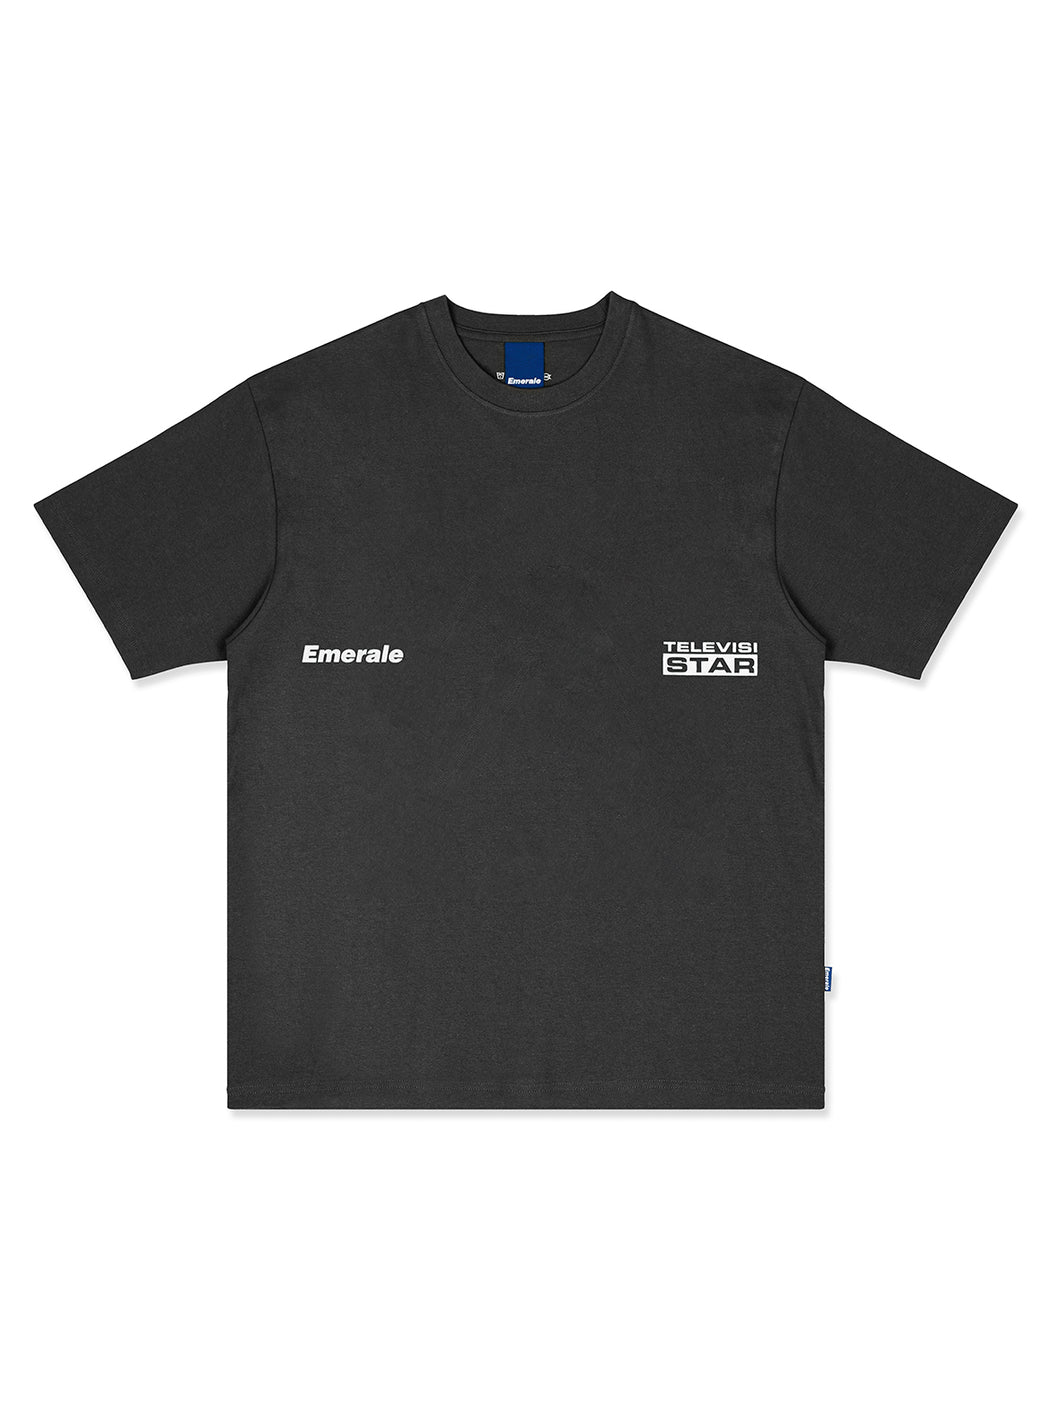 EMERALE X TELEVISI STAR CHARCOAL T-SHIRT